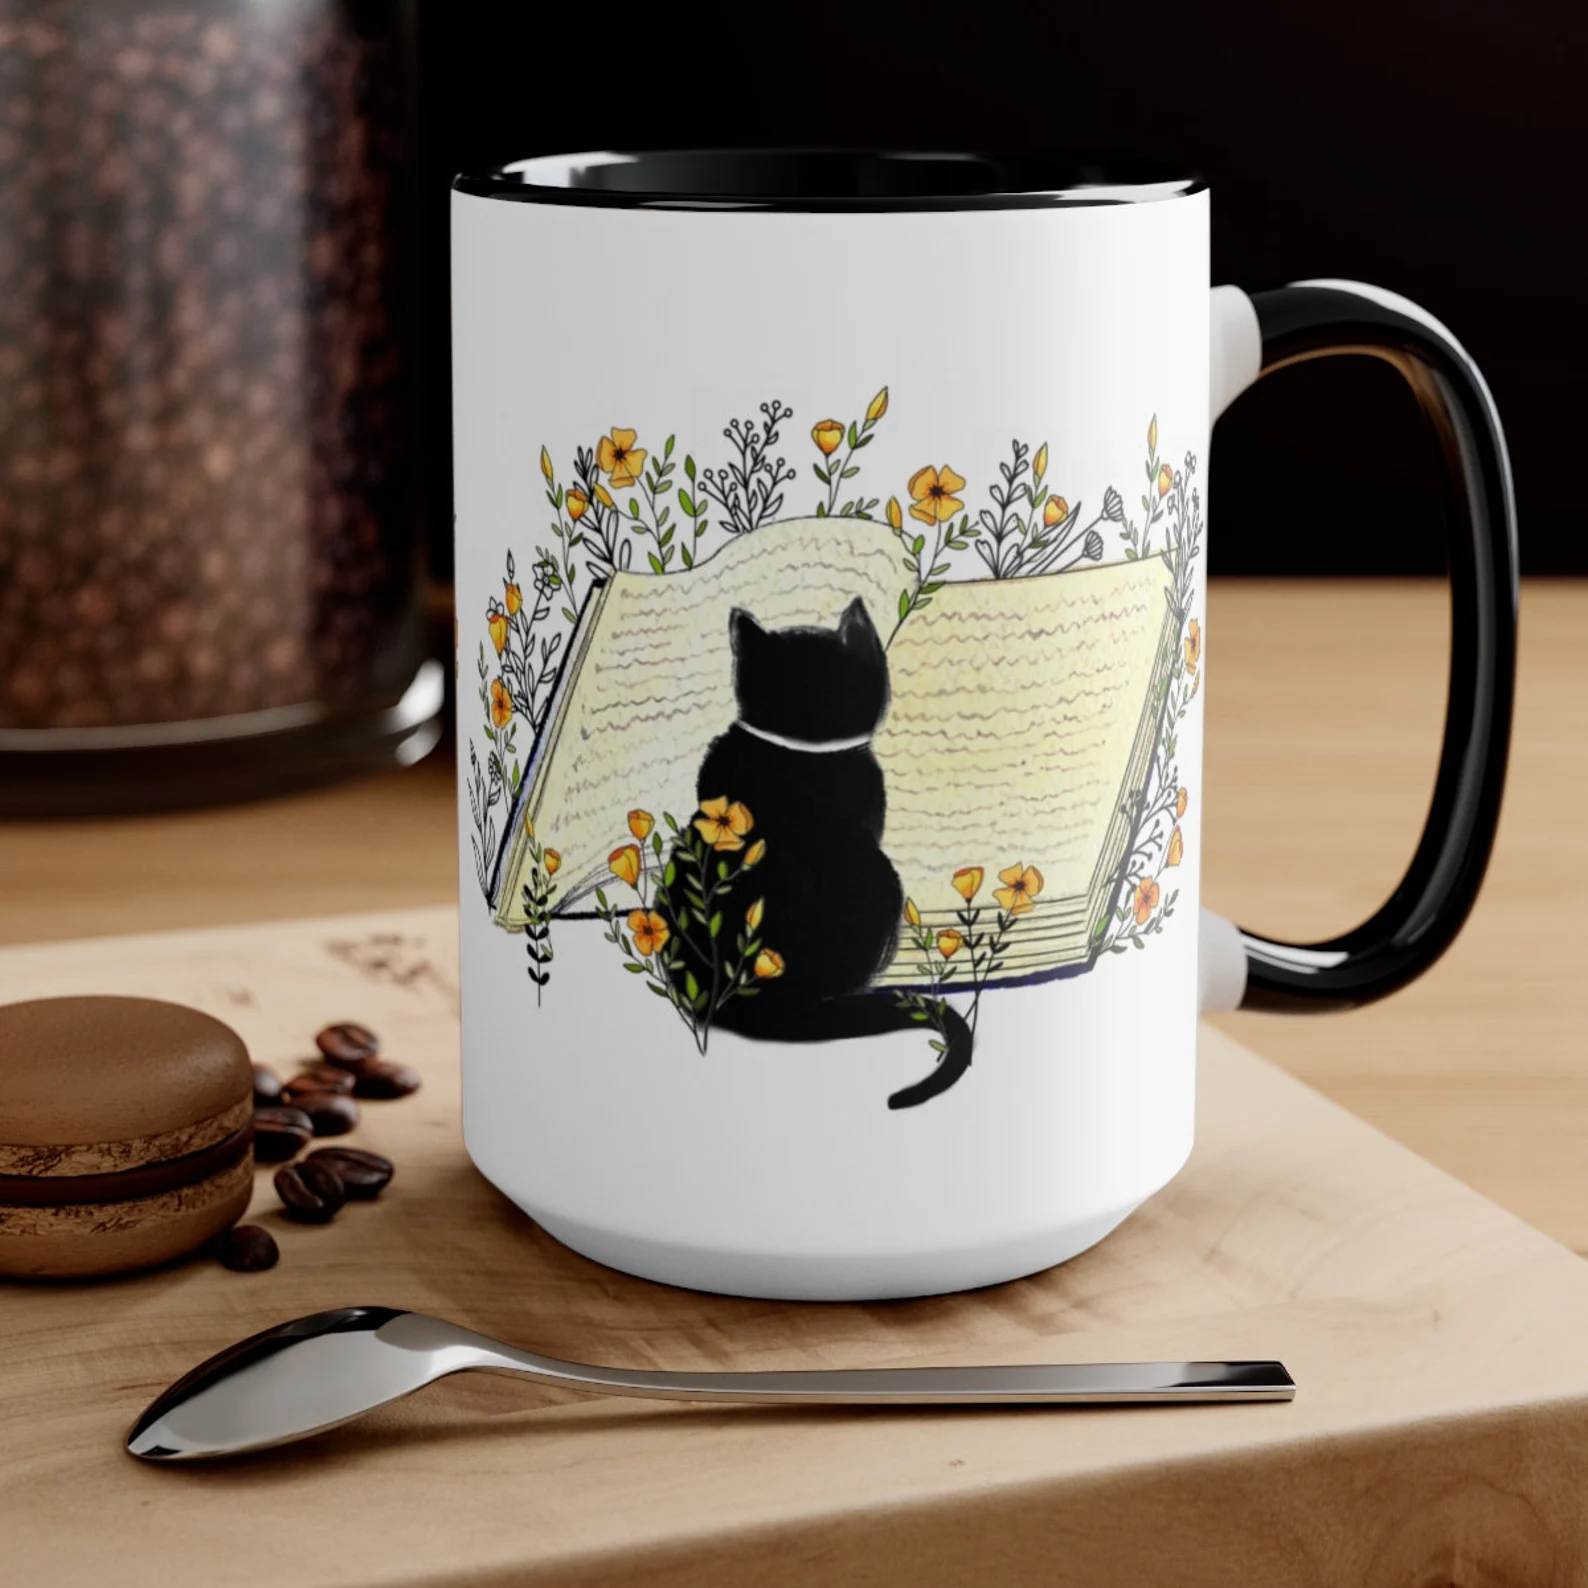 black and white mug depicting a black cat reading an open book surrounded by orange flowers